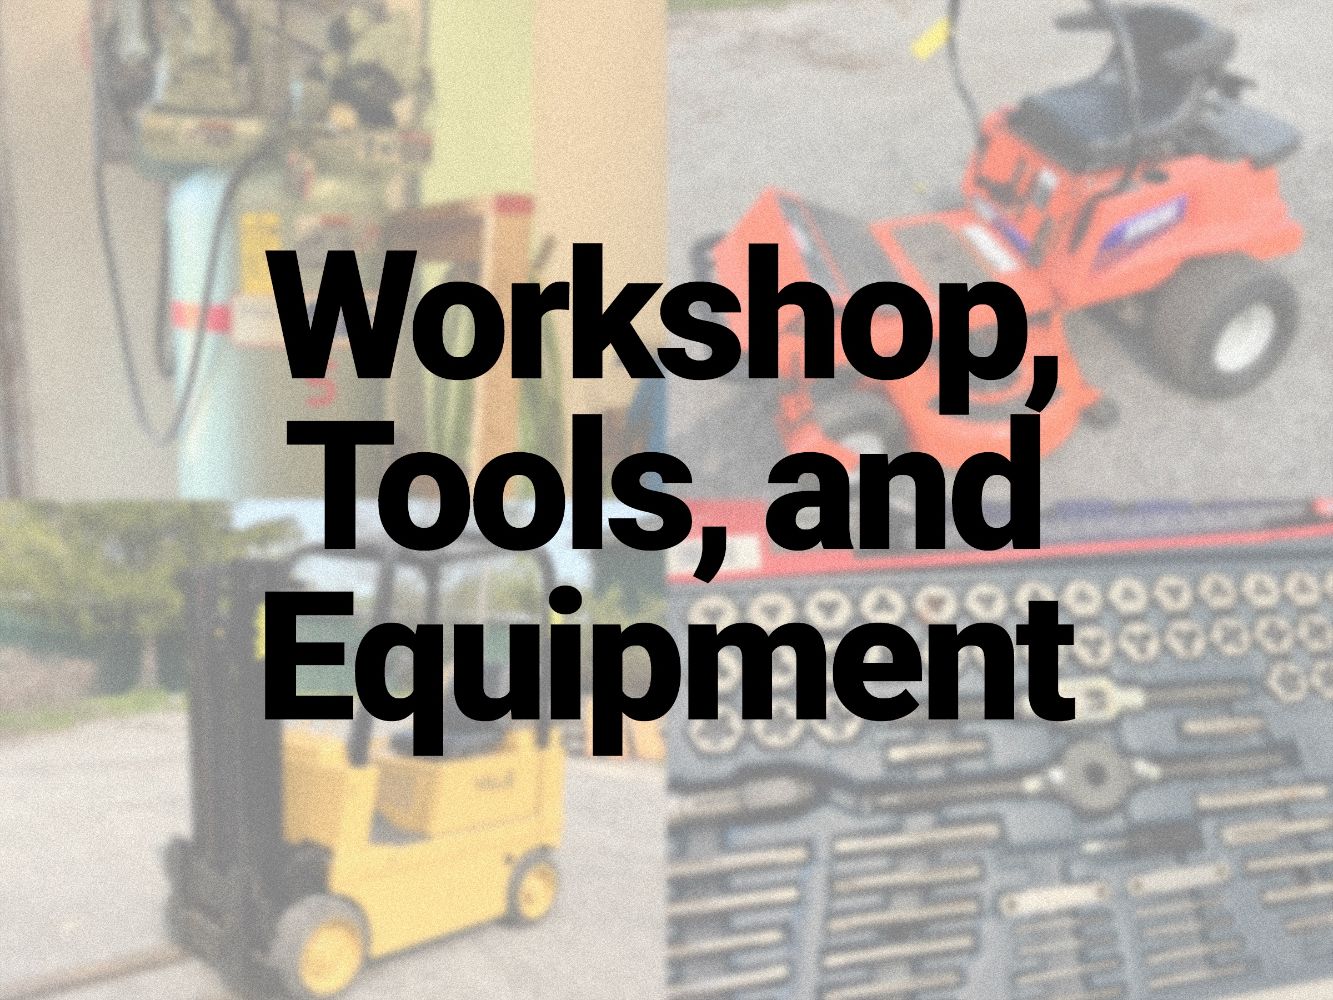 Workshop, Tools, and Equipment – Buffalo, NY - A wide variety of tools, equipment, warehouse, shipping and other equipment